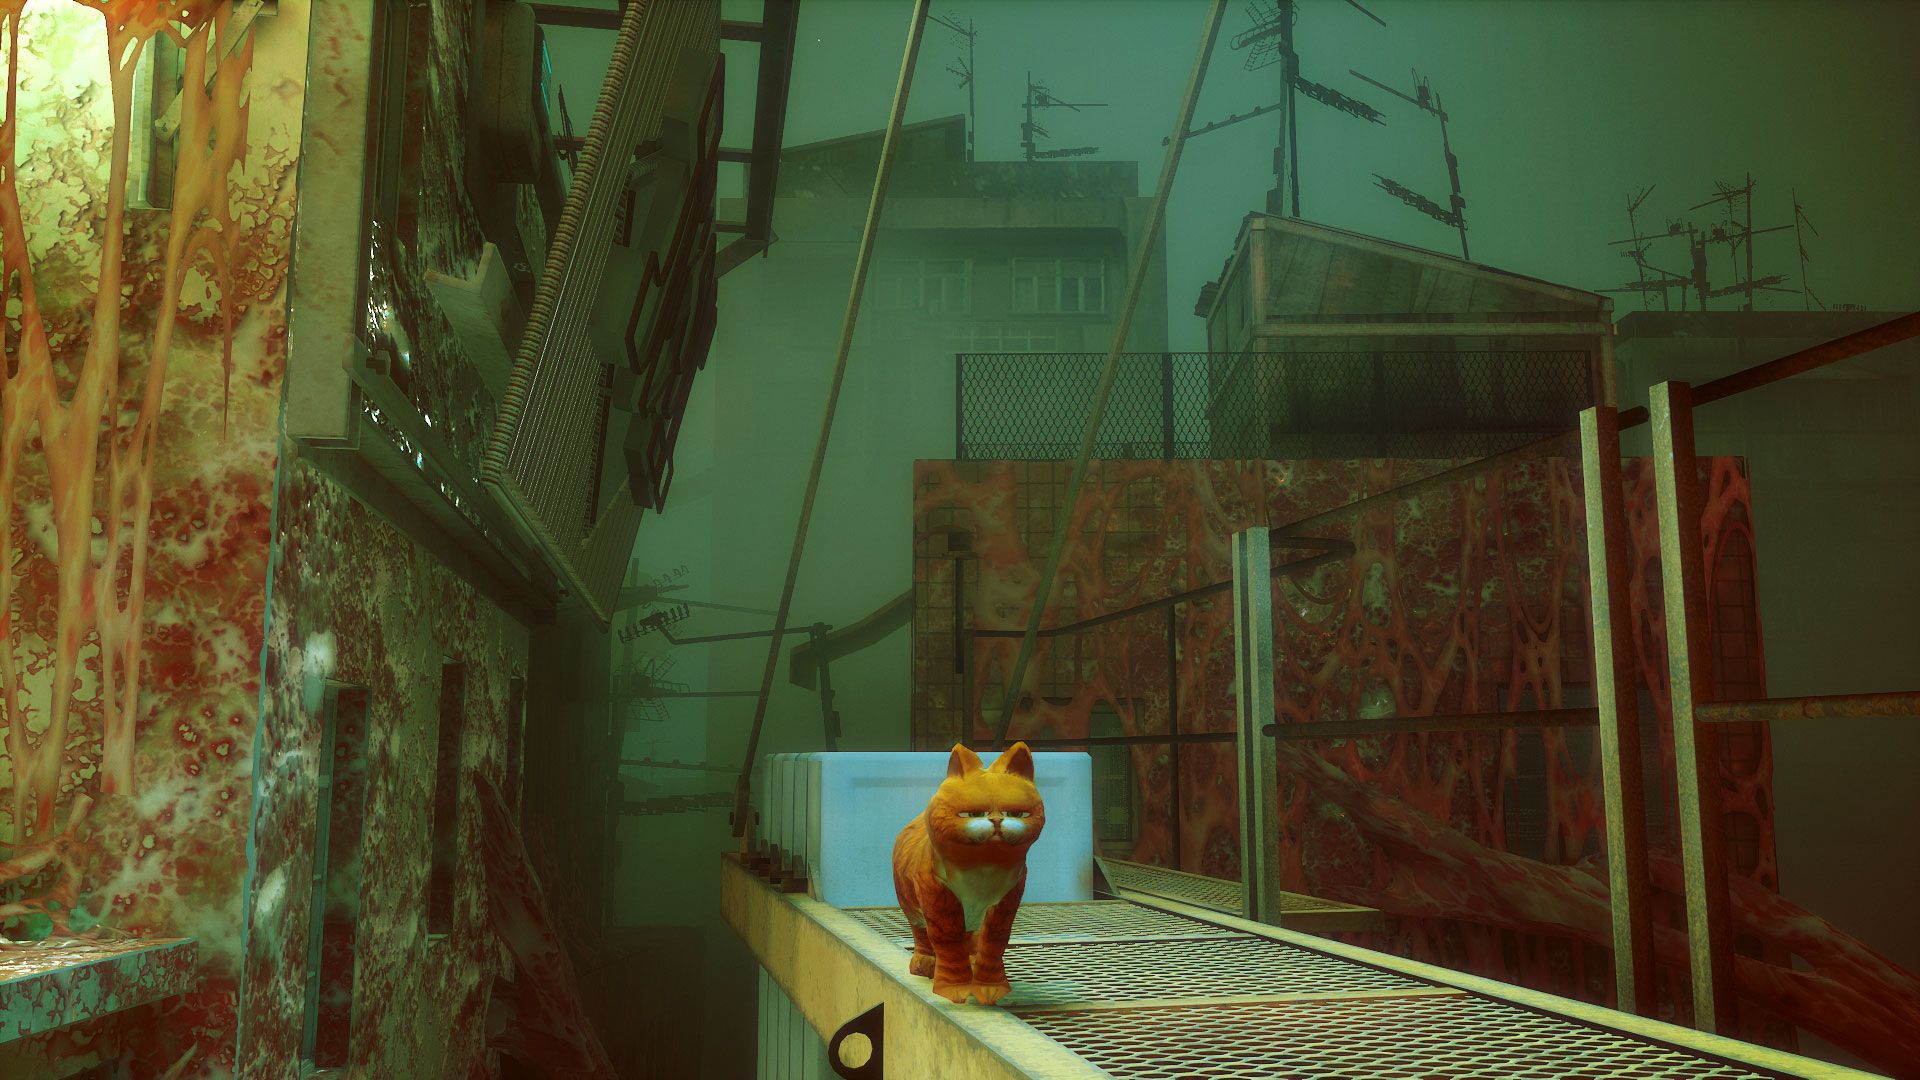 In this article, we are going to be covering how to access the Stray Garfield mod, so you can roam the streets of the robot-filled city as America's laziest cat.